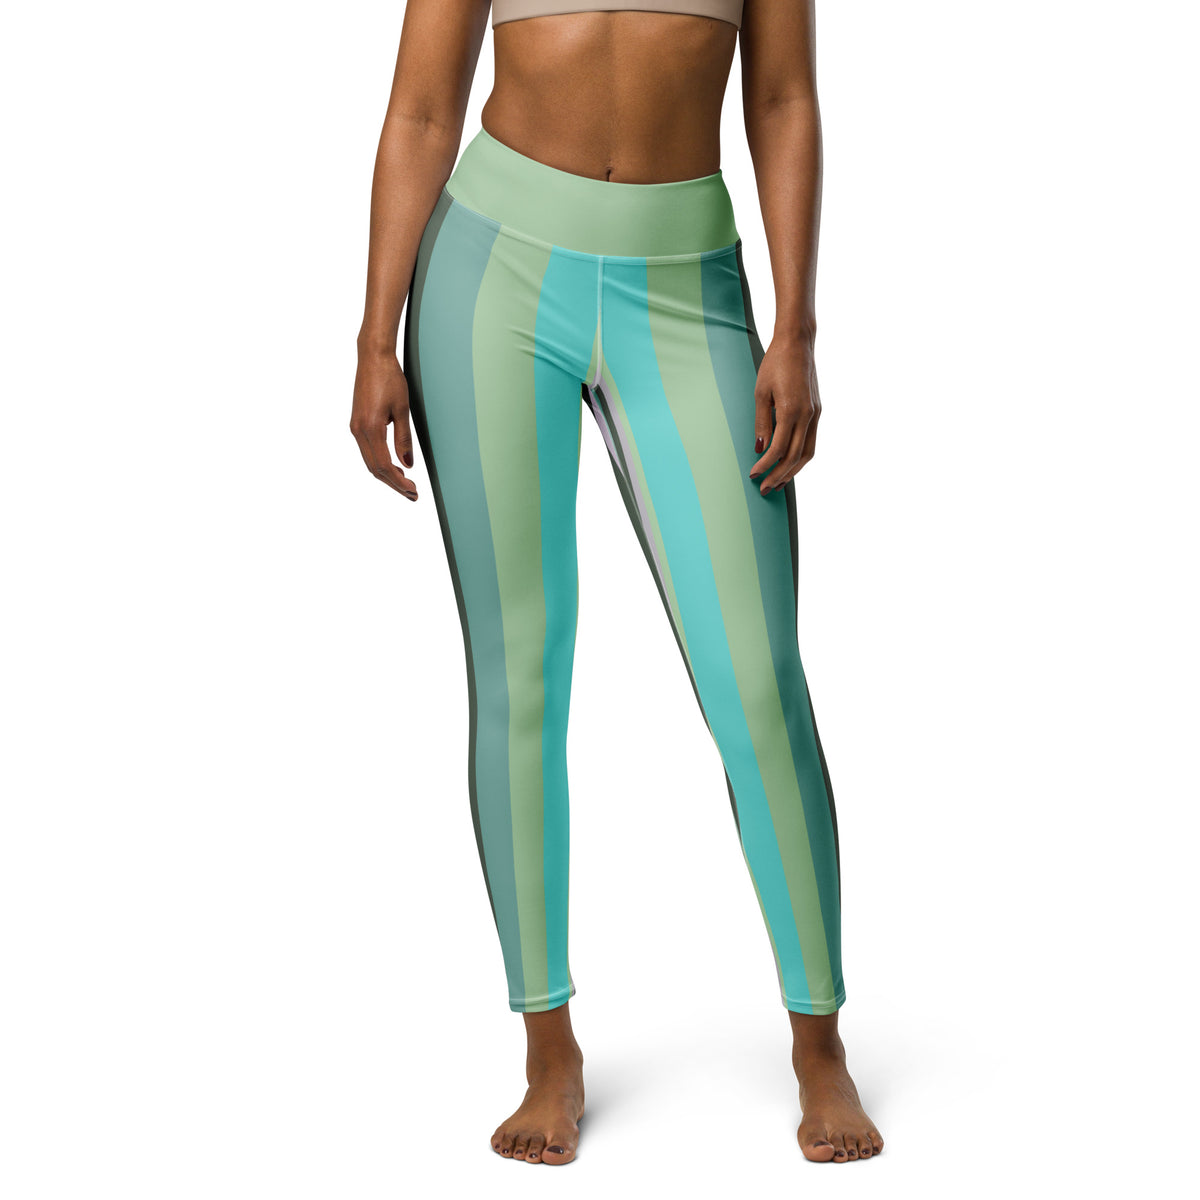 High-performance Celestial Harmony leggings, perfect for those who seek style and substance in their yoga wear.